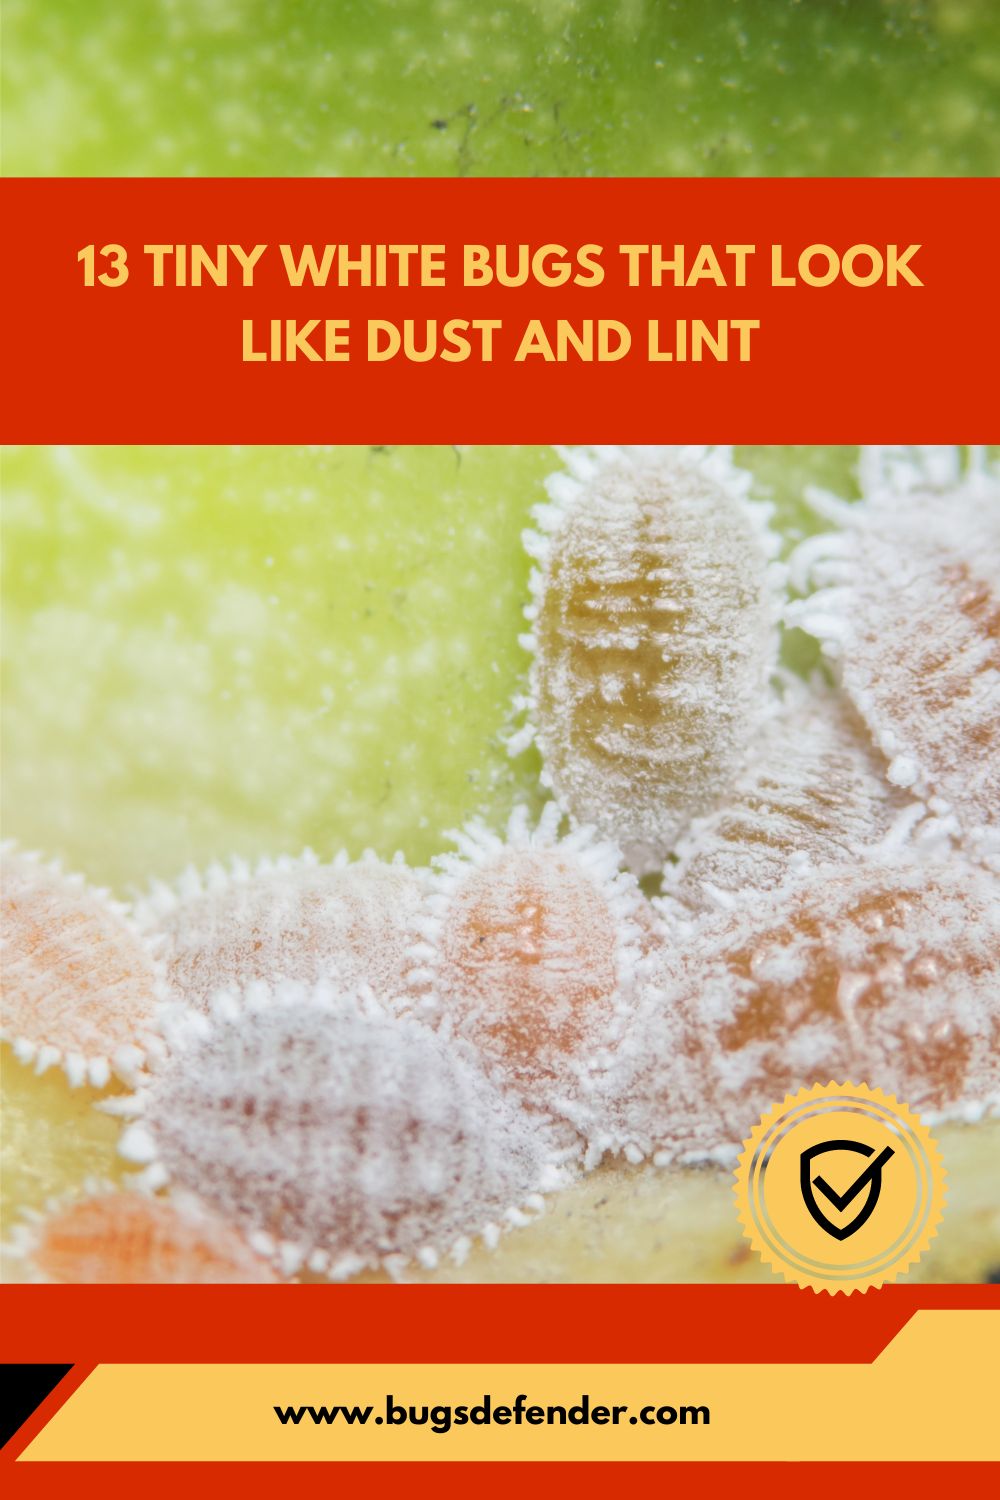 13 Tiny White Bugs That Look Like Dust and Lint pin1